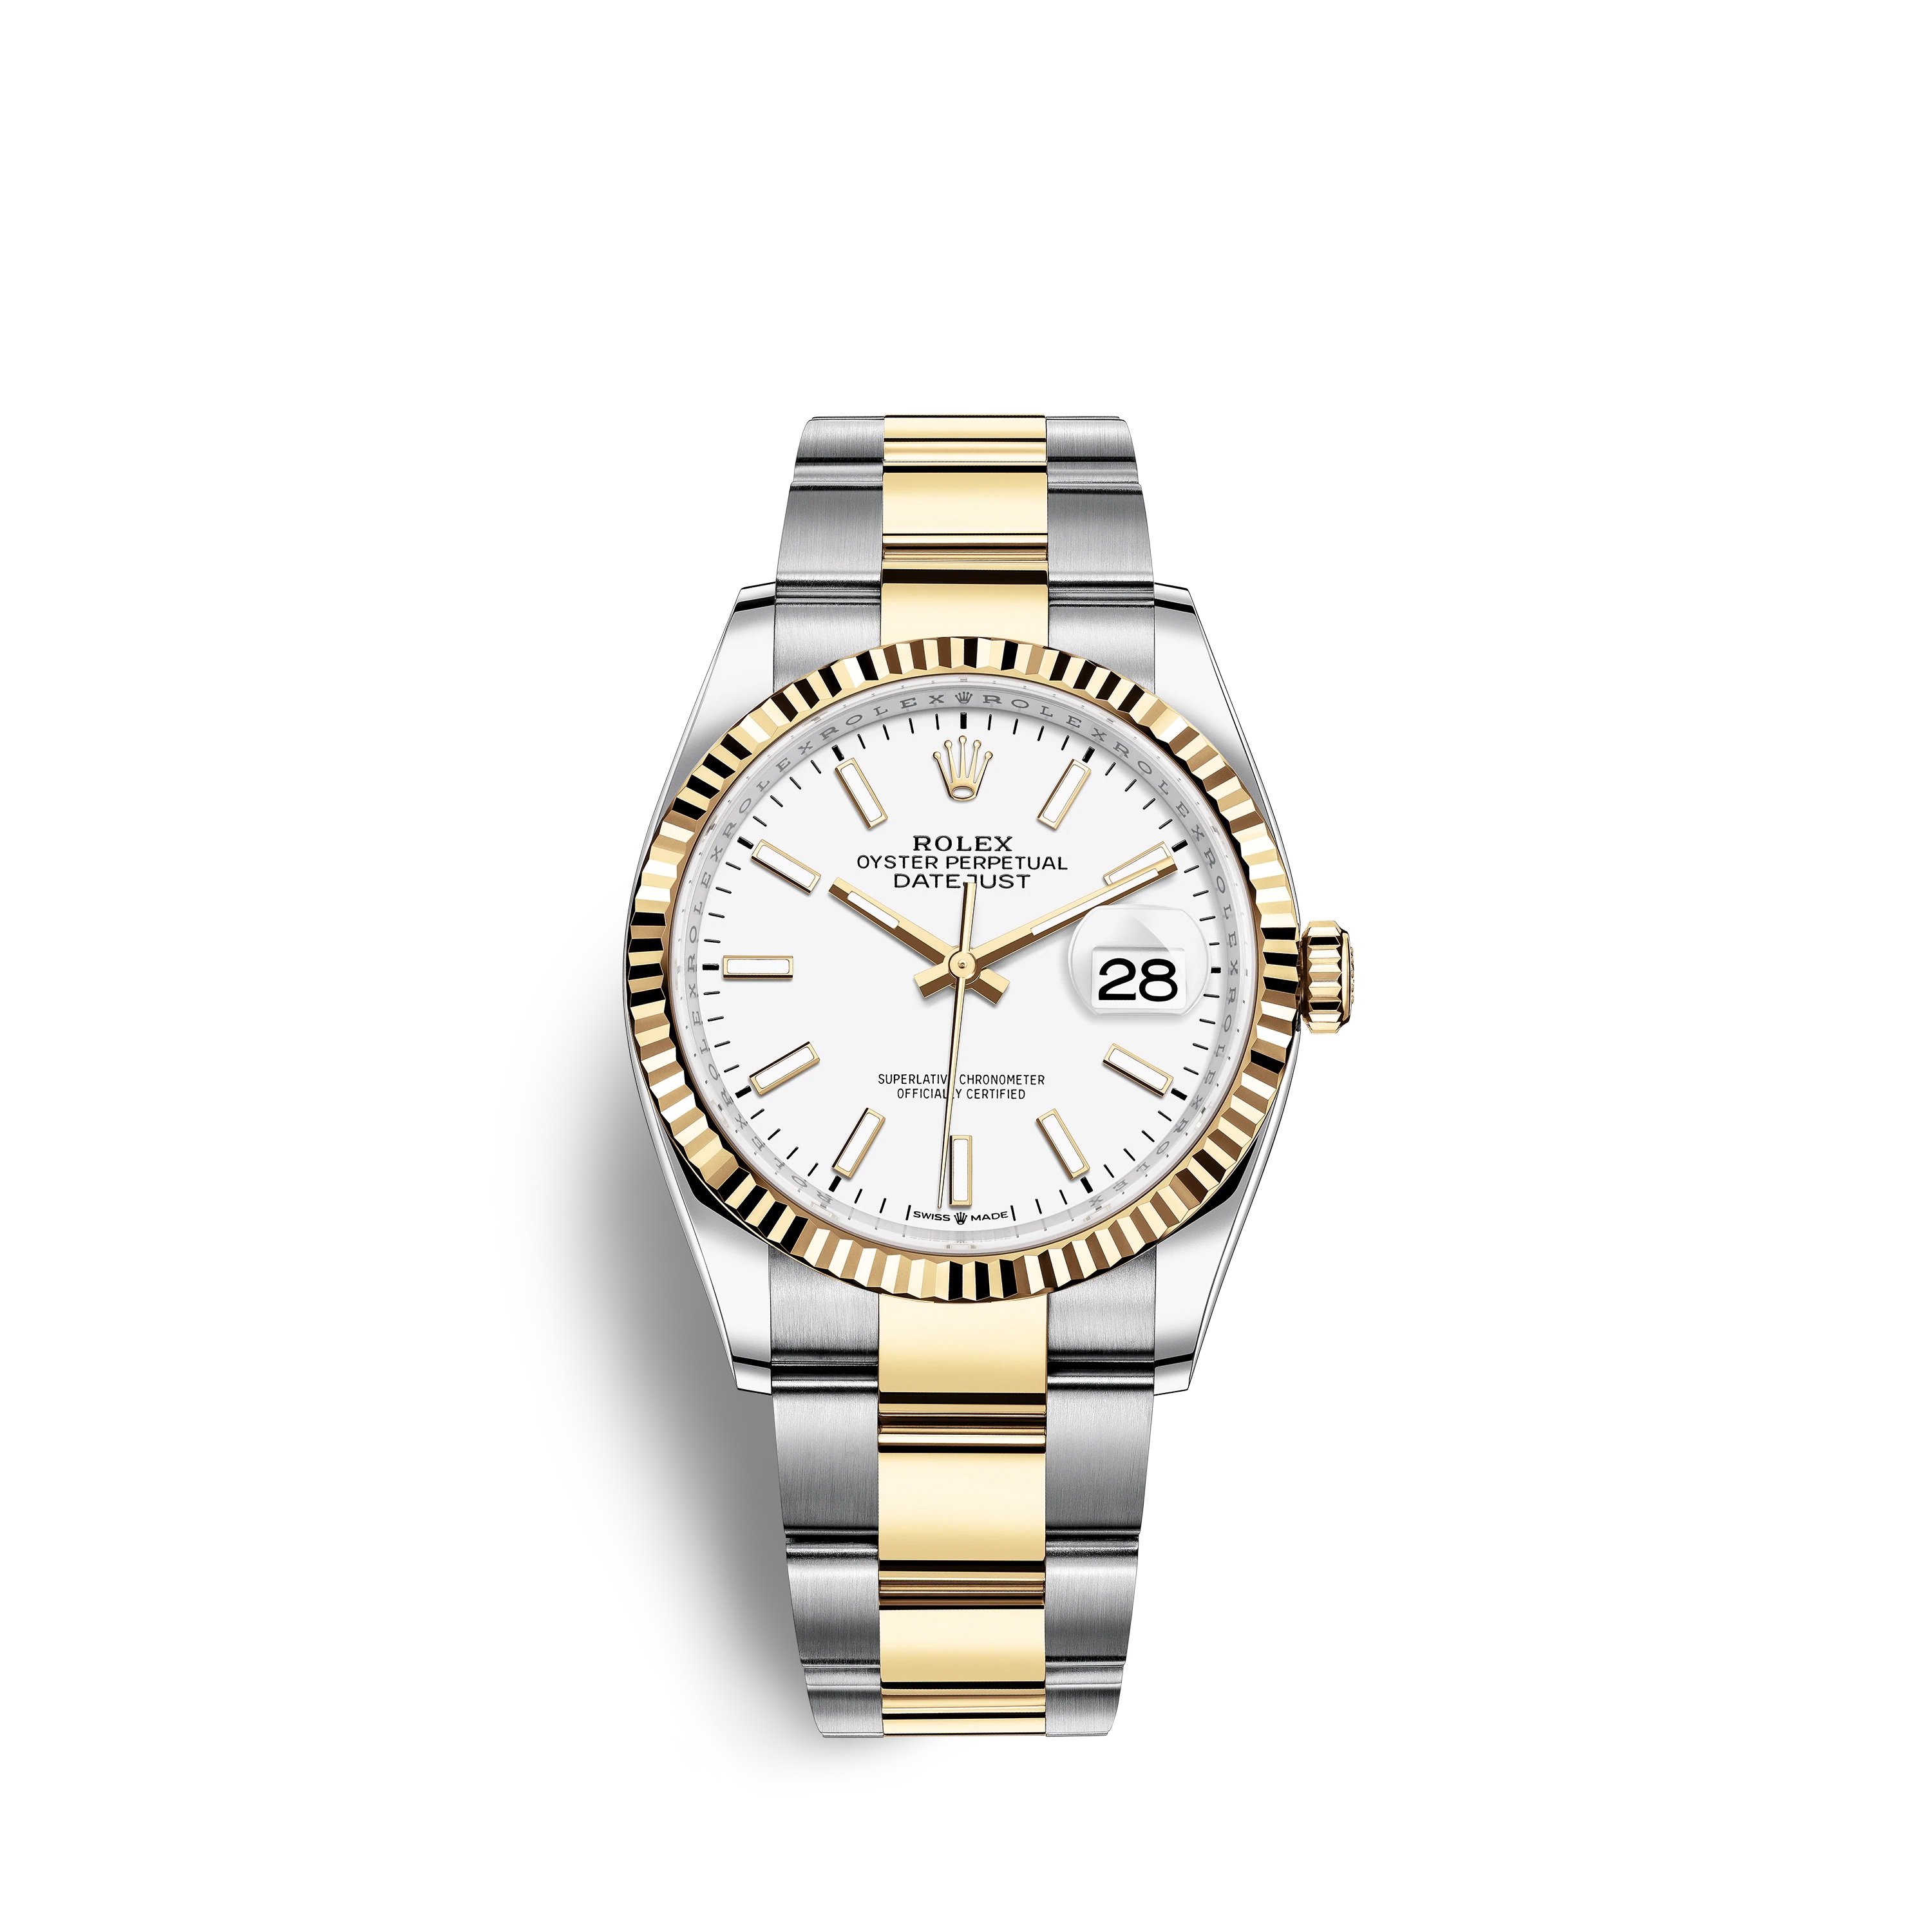 Datejust 36 126233 Gold & Stainless Steel Watch (White)